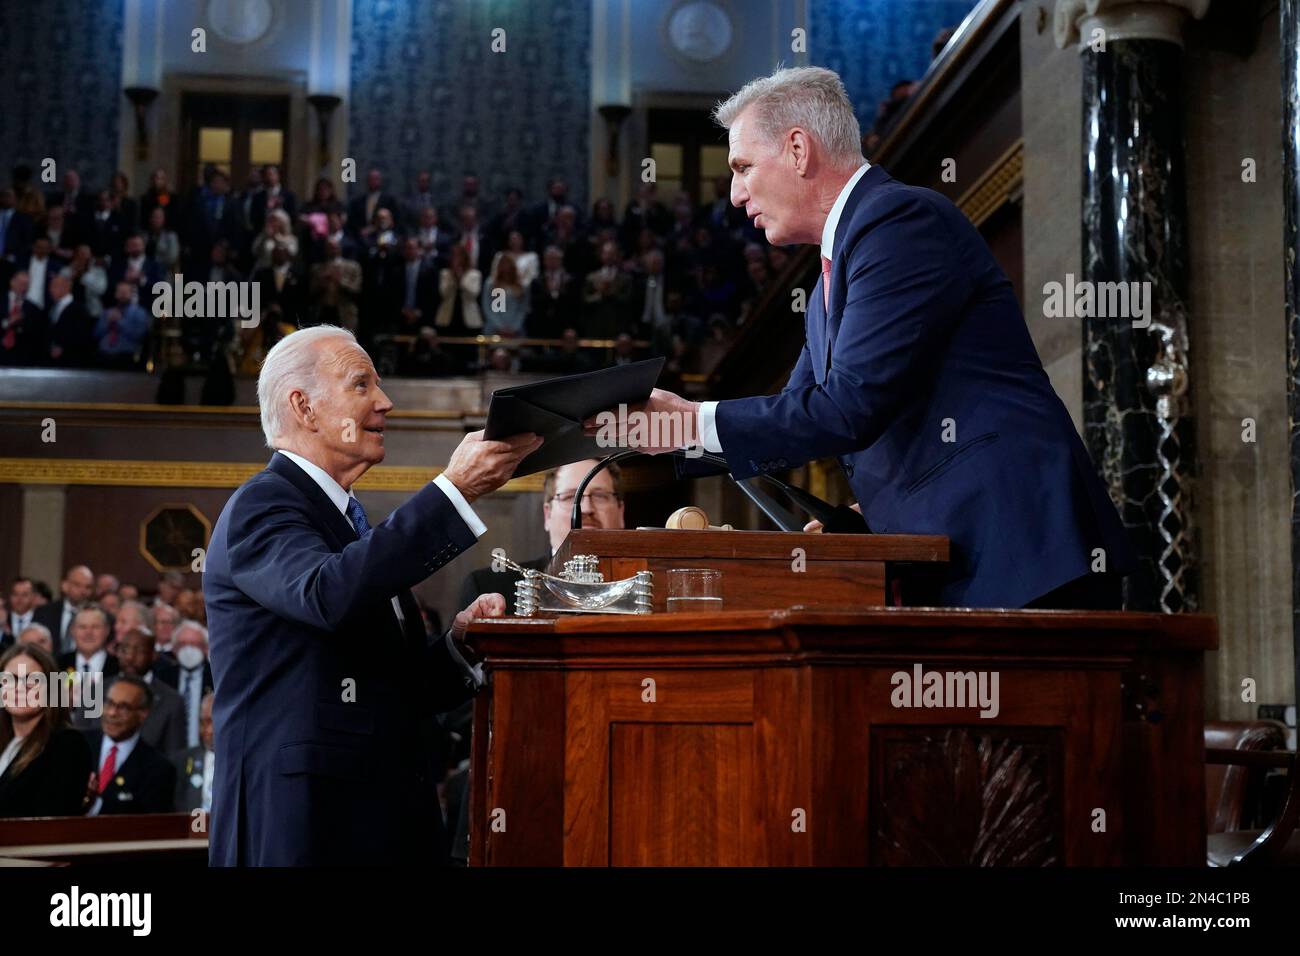 President Joe Biden hands a copy of his speech to House Speaker Kevin McCarthy of Calif., before he delivers his State of the Union address to a joint session of Congress, at the Capitol in Washington, Tuesday, Feb. 7, 2023. Photo by Jacquelyn Martin/Pool/ABACAPRESS.COM Stock Photo